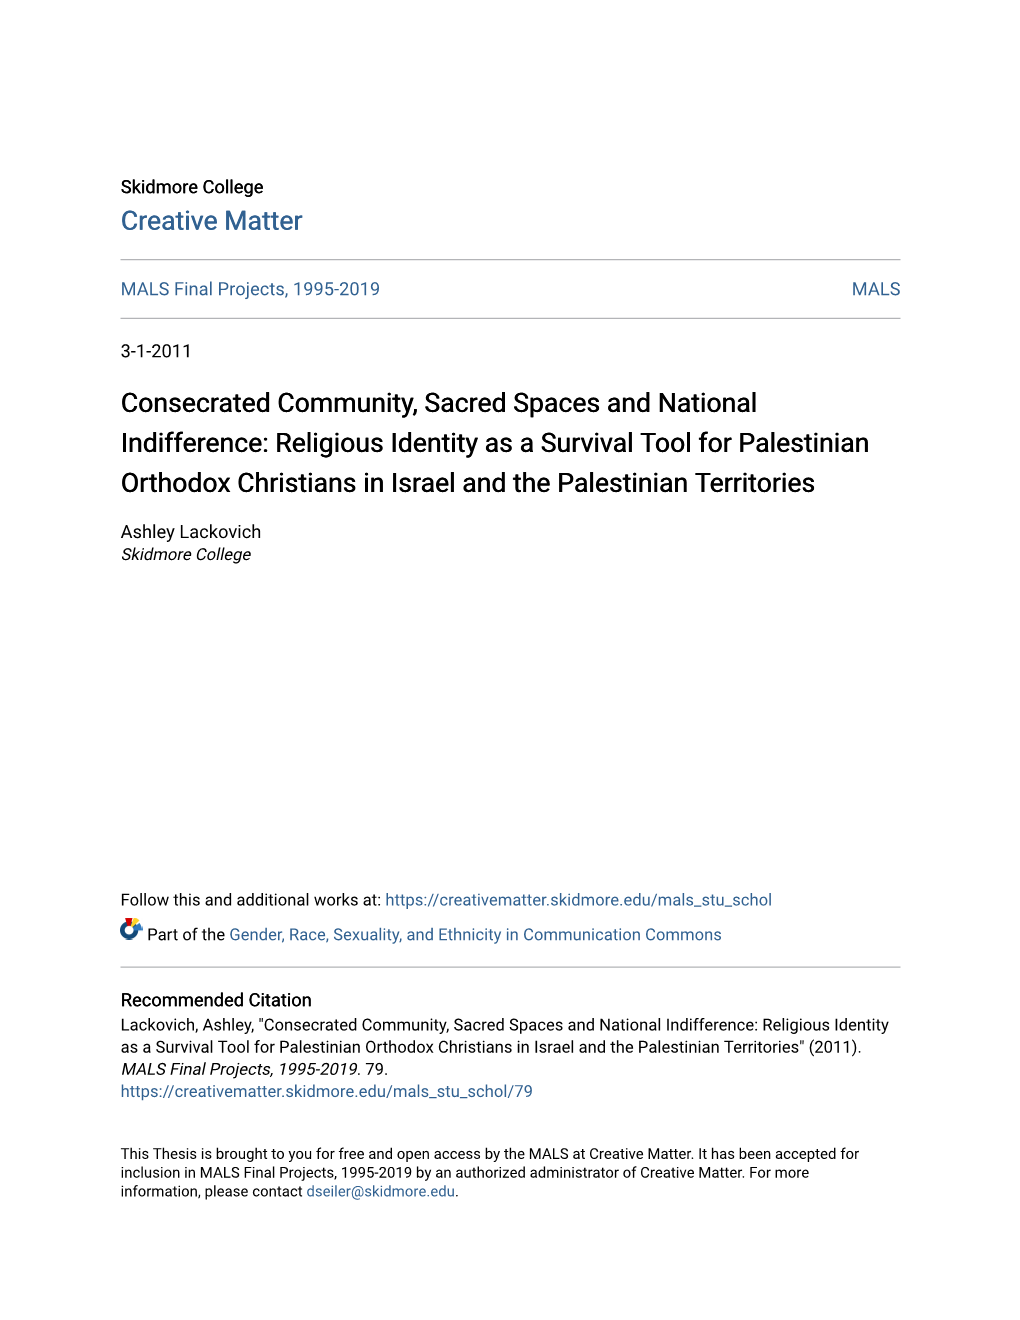 Religious Identity As a Survival Tool for Palestinian Orthodox Christians in Israel and the Palestinian Territories